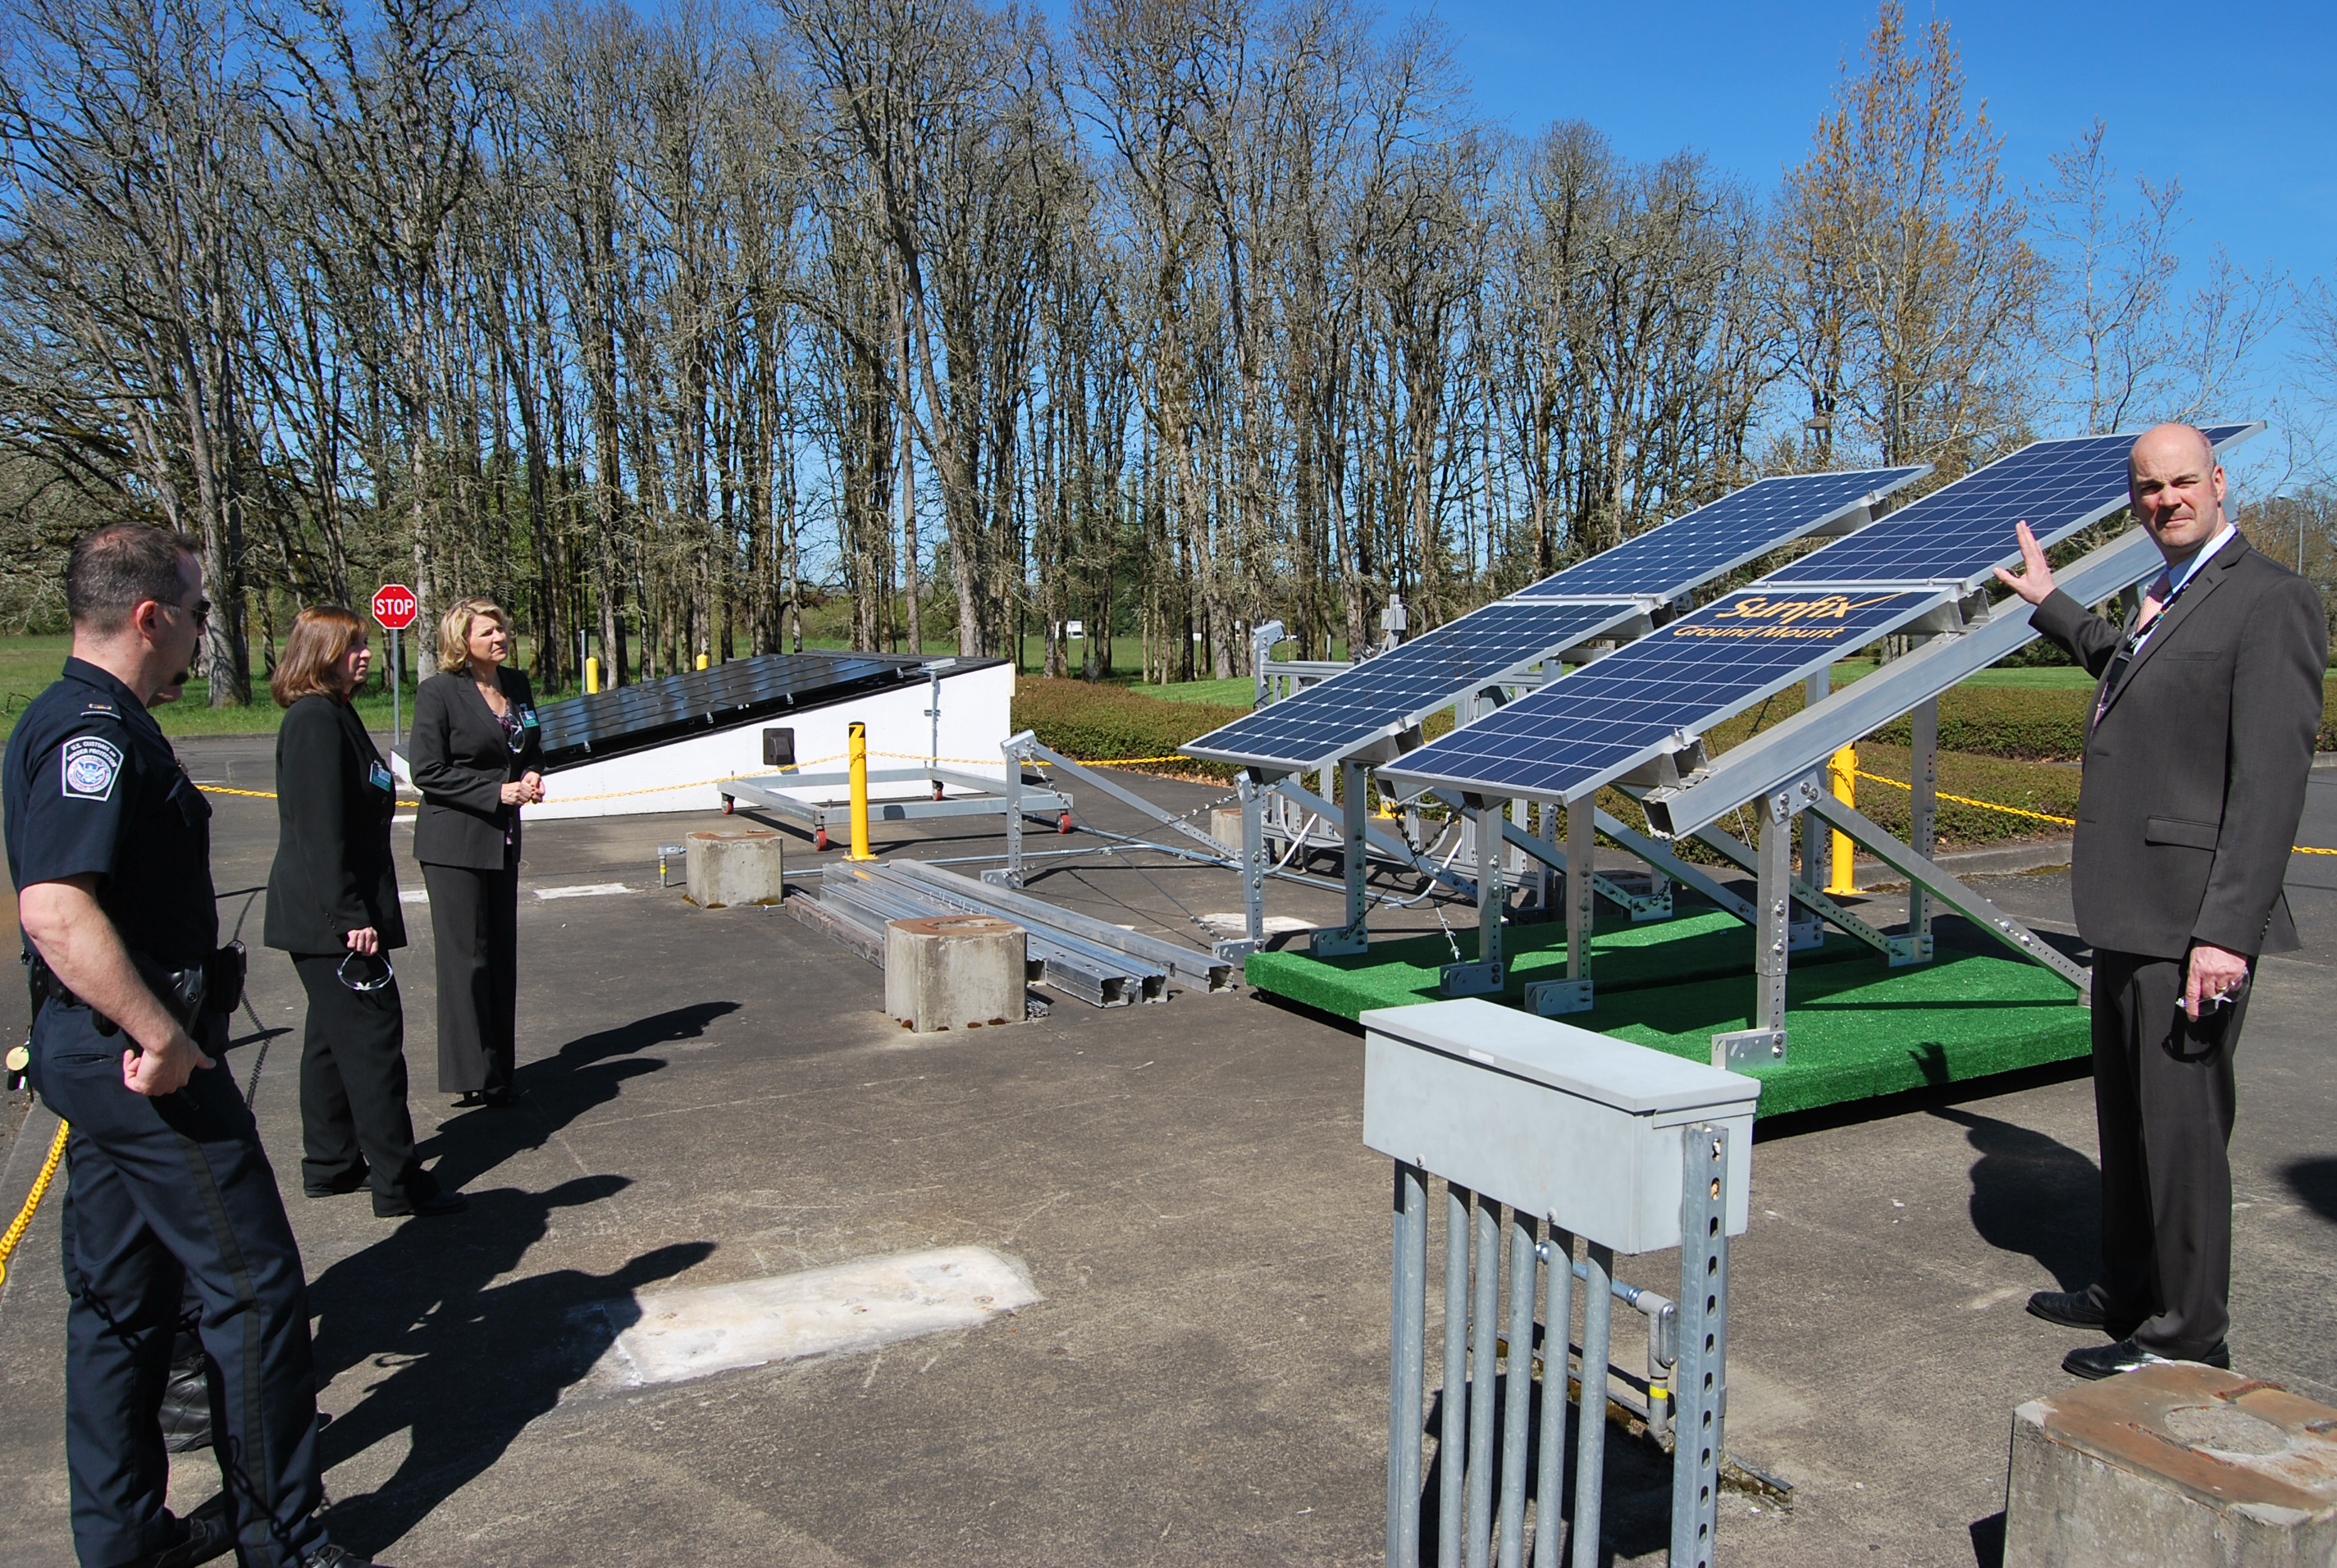 Steve Pecis, SolarWorld’s director of operations, demonstrates how solar panels collect the sun’s energy on the grounds of SolarWorld’s Hillsboro, Oregon facility. CBP Officer William Wells, left foreground; Import Specialist Kristy Huckins, center; and Senior Import Specialist Katie Schultz, far left, listen. Photo by Ed Colford